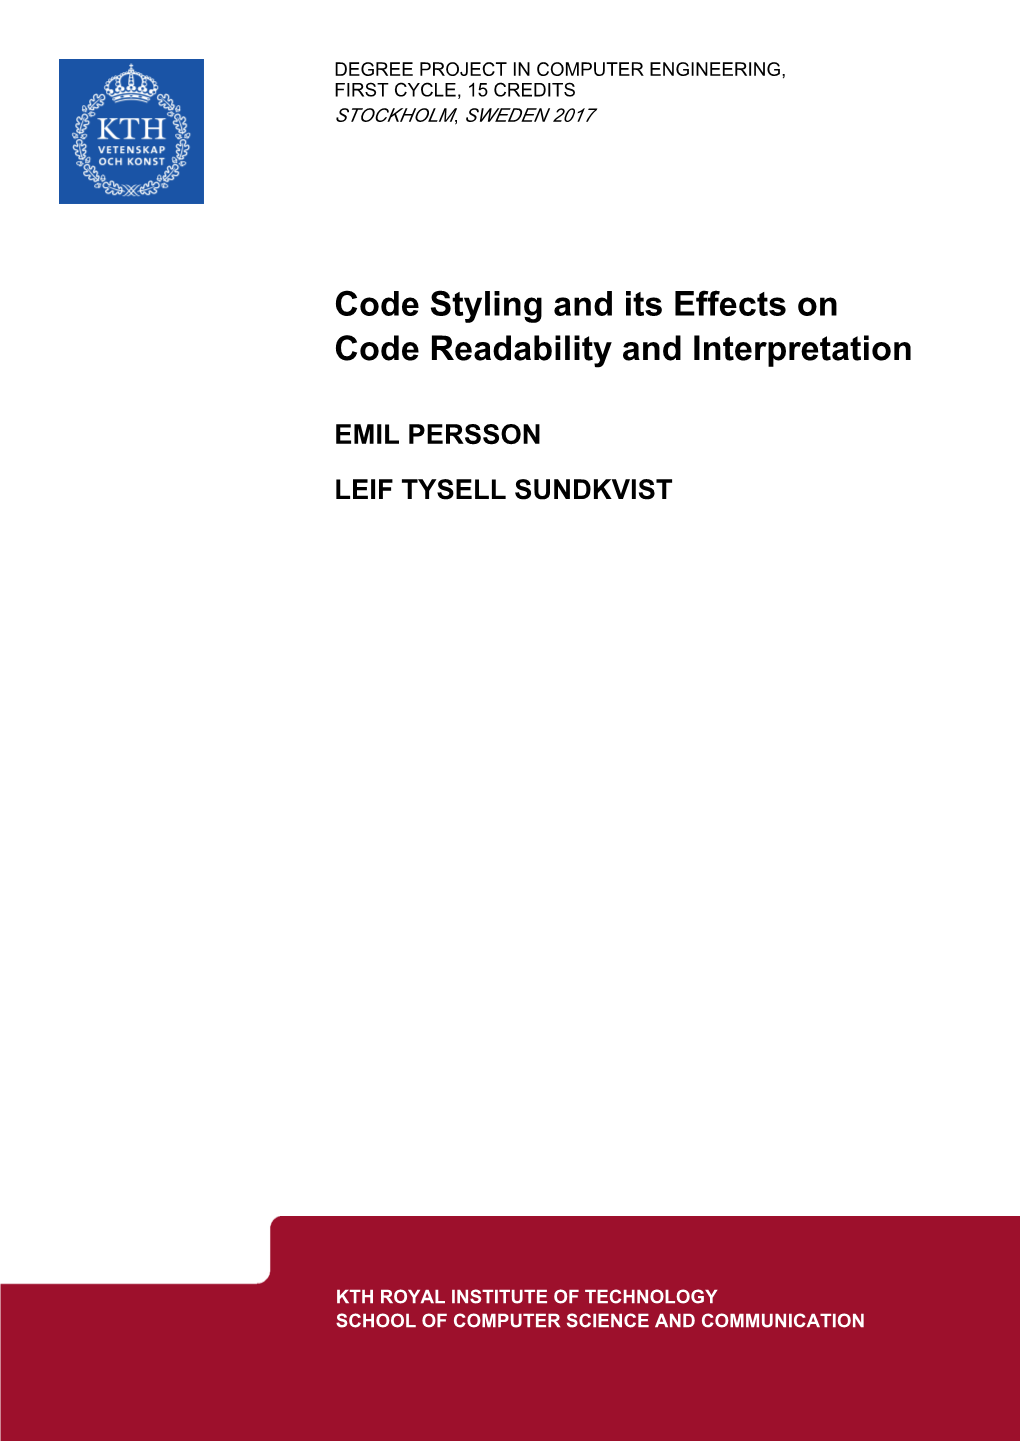 Code Styling and Its Effects on Code Readability and Interpretation